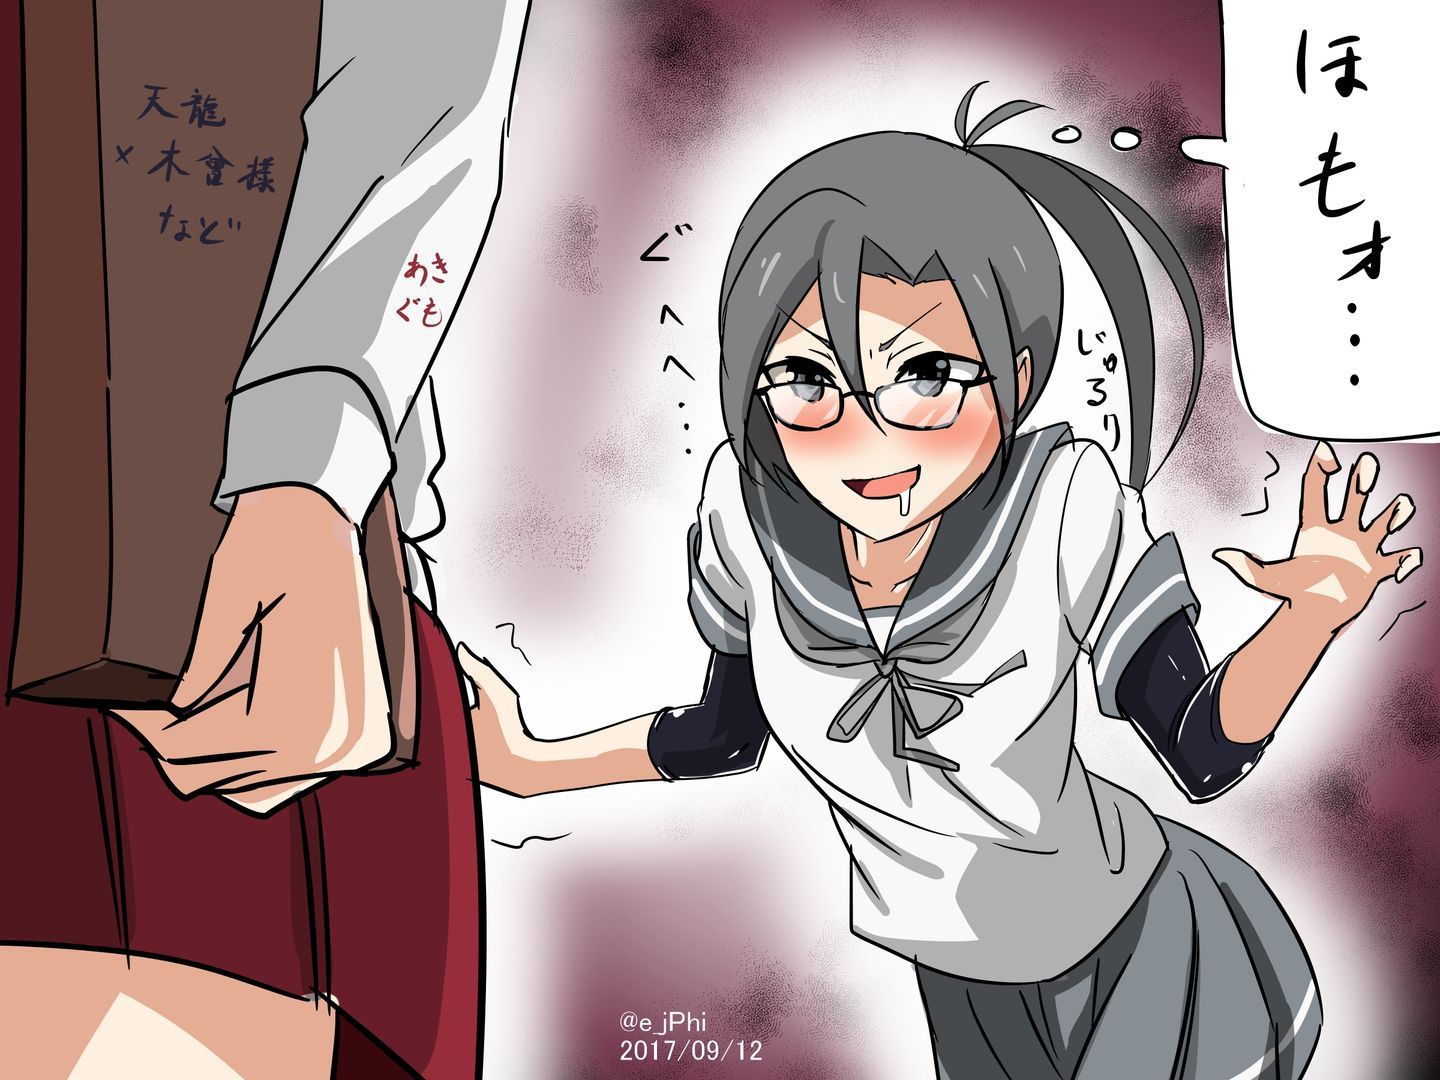 [Secondary ZIP] Amagiri-chan's image summary of the ship that seems not bad also abs girls 16